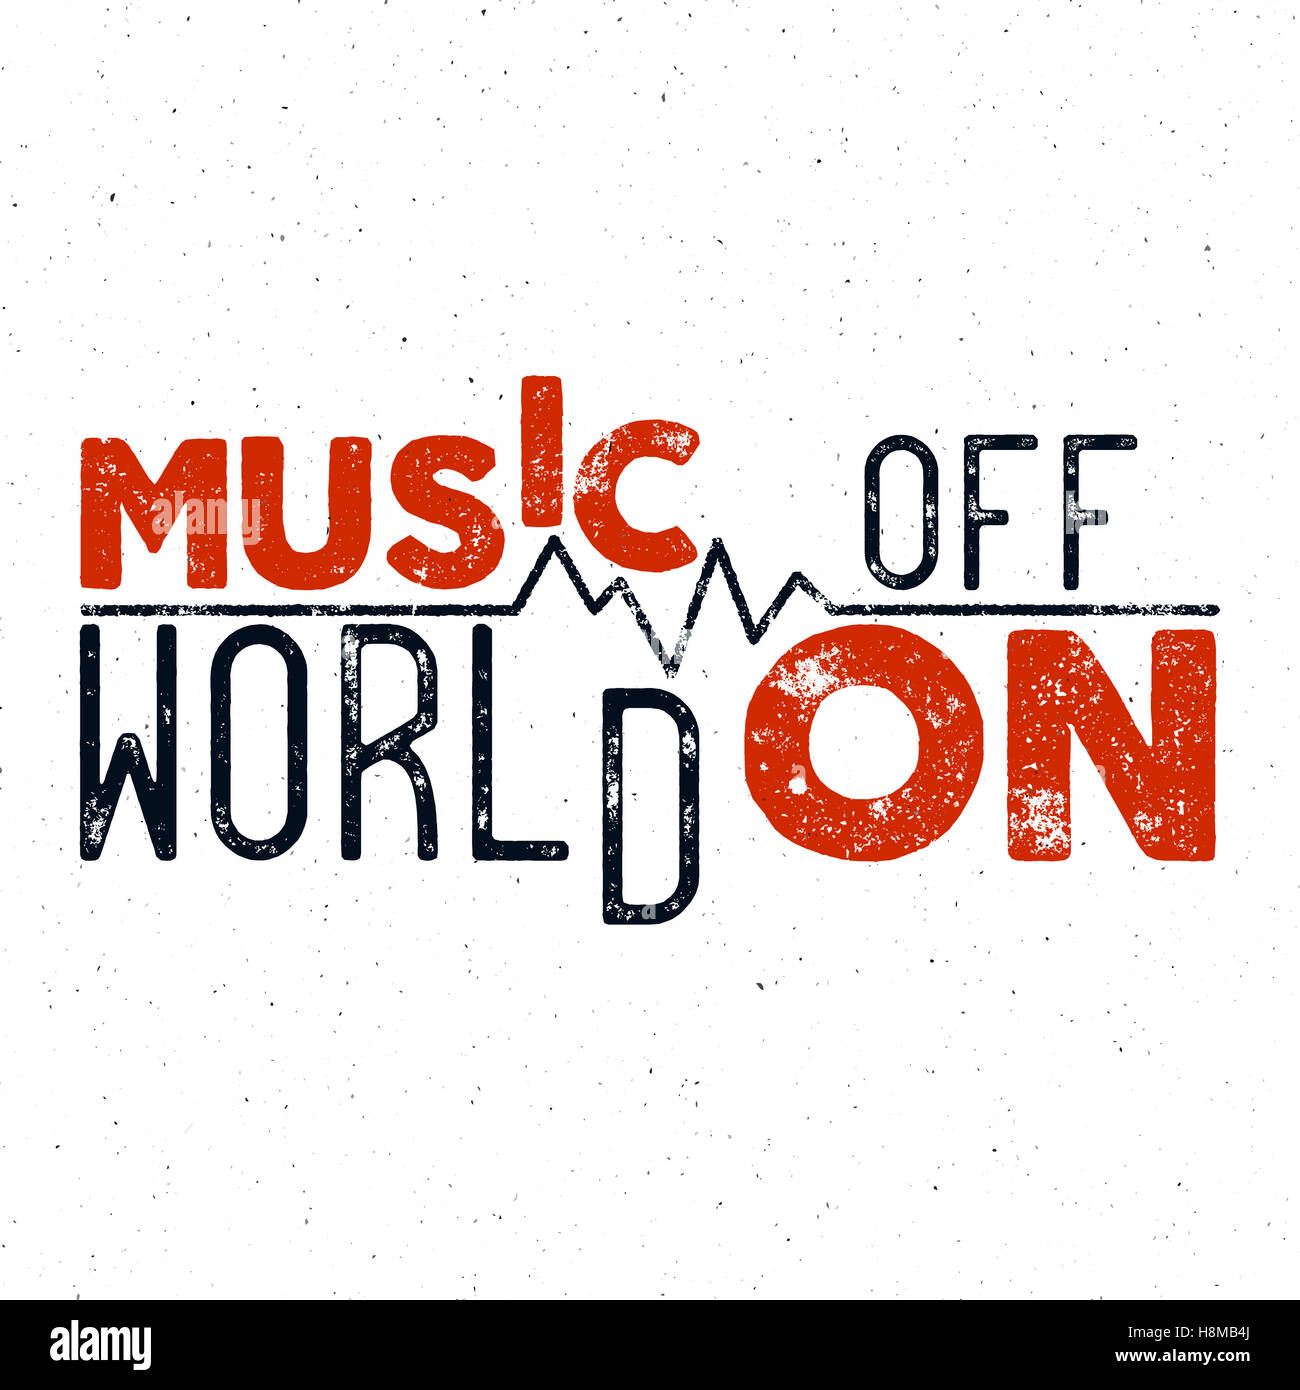 Inspirational typographic quote poster. Motivation text - Music on world off with grunge effects. Good for tee design t-shirt, web projects. Creative lettering background. Isolated Stock Photo